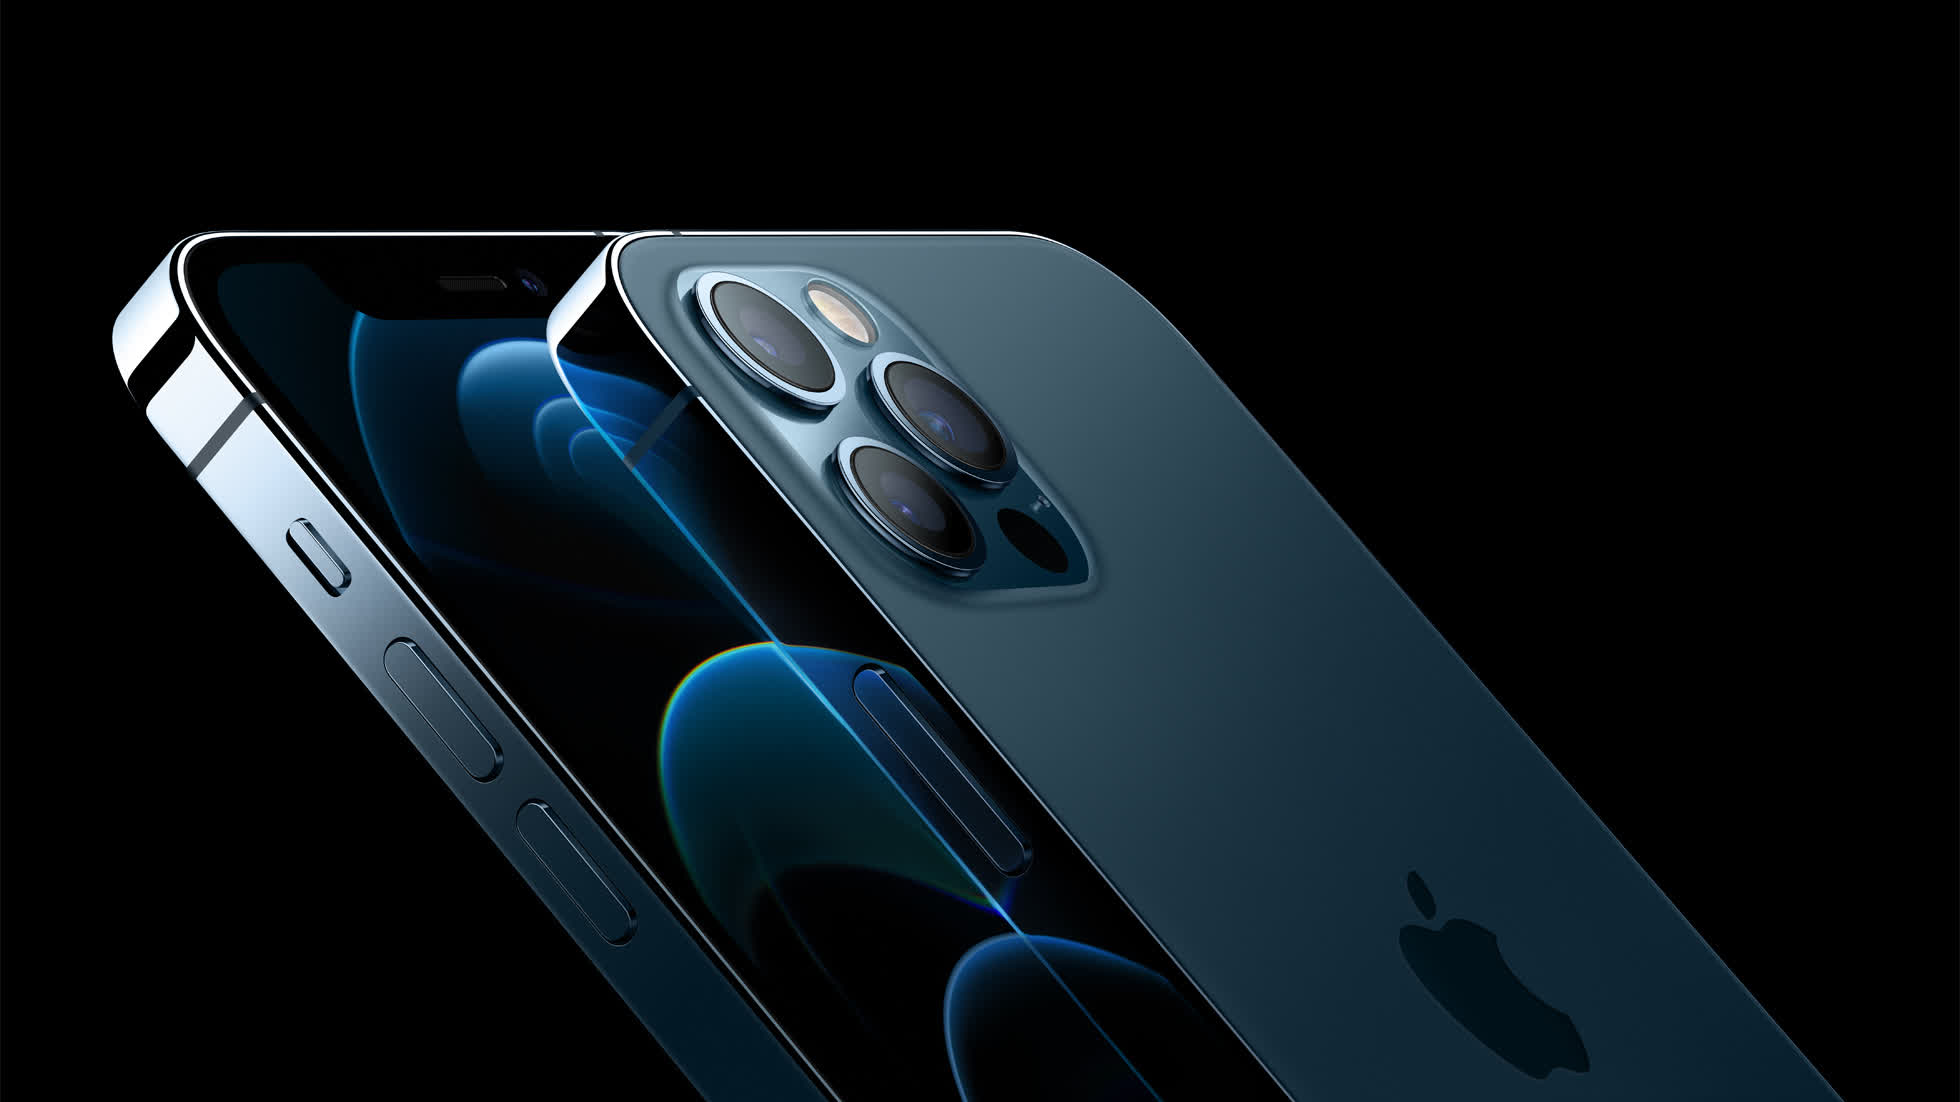 Apple announces the iPhone 12 Pro and iPhone 12 Pro Max, its largest and most capable smartphones yet